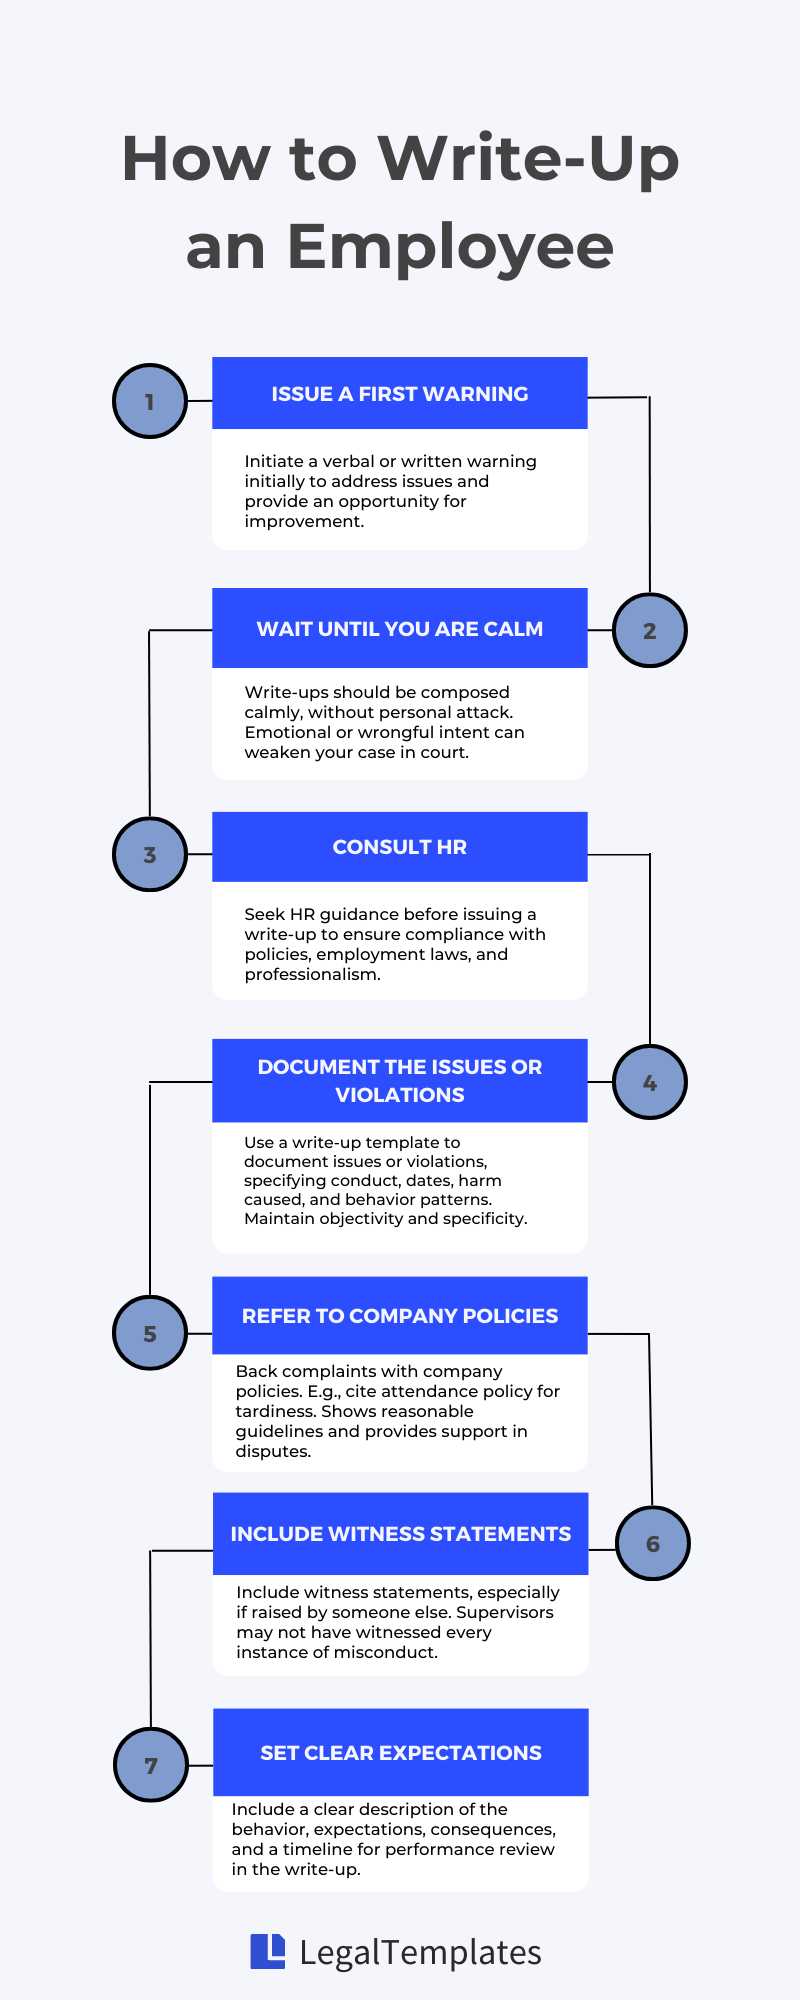 How to write-up an employee step-by-step infographic